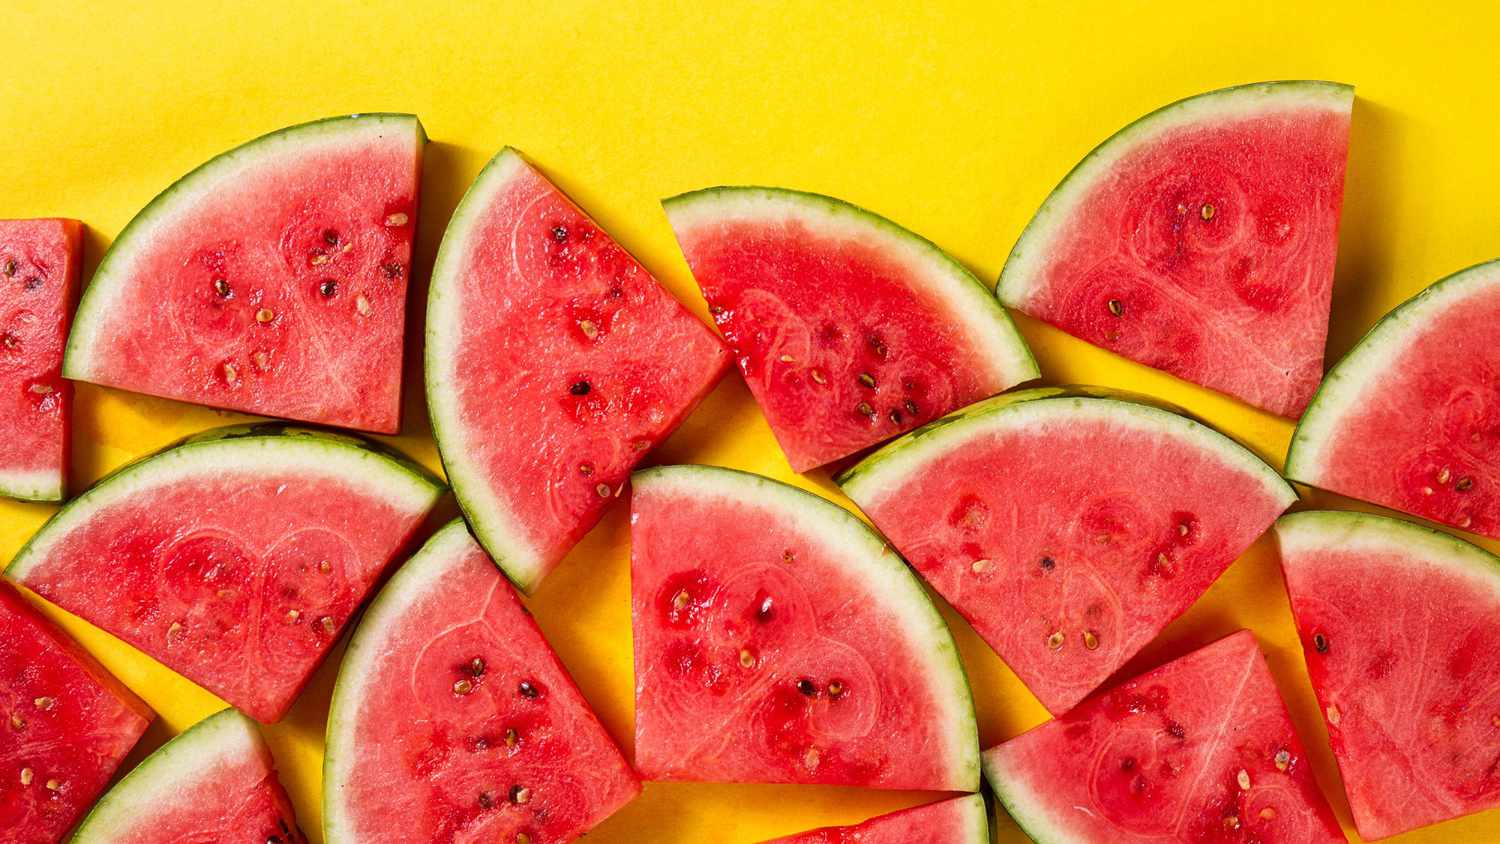 How to Preserve Watermelons: A Step-by-Step Guide